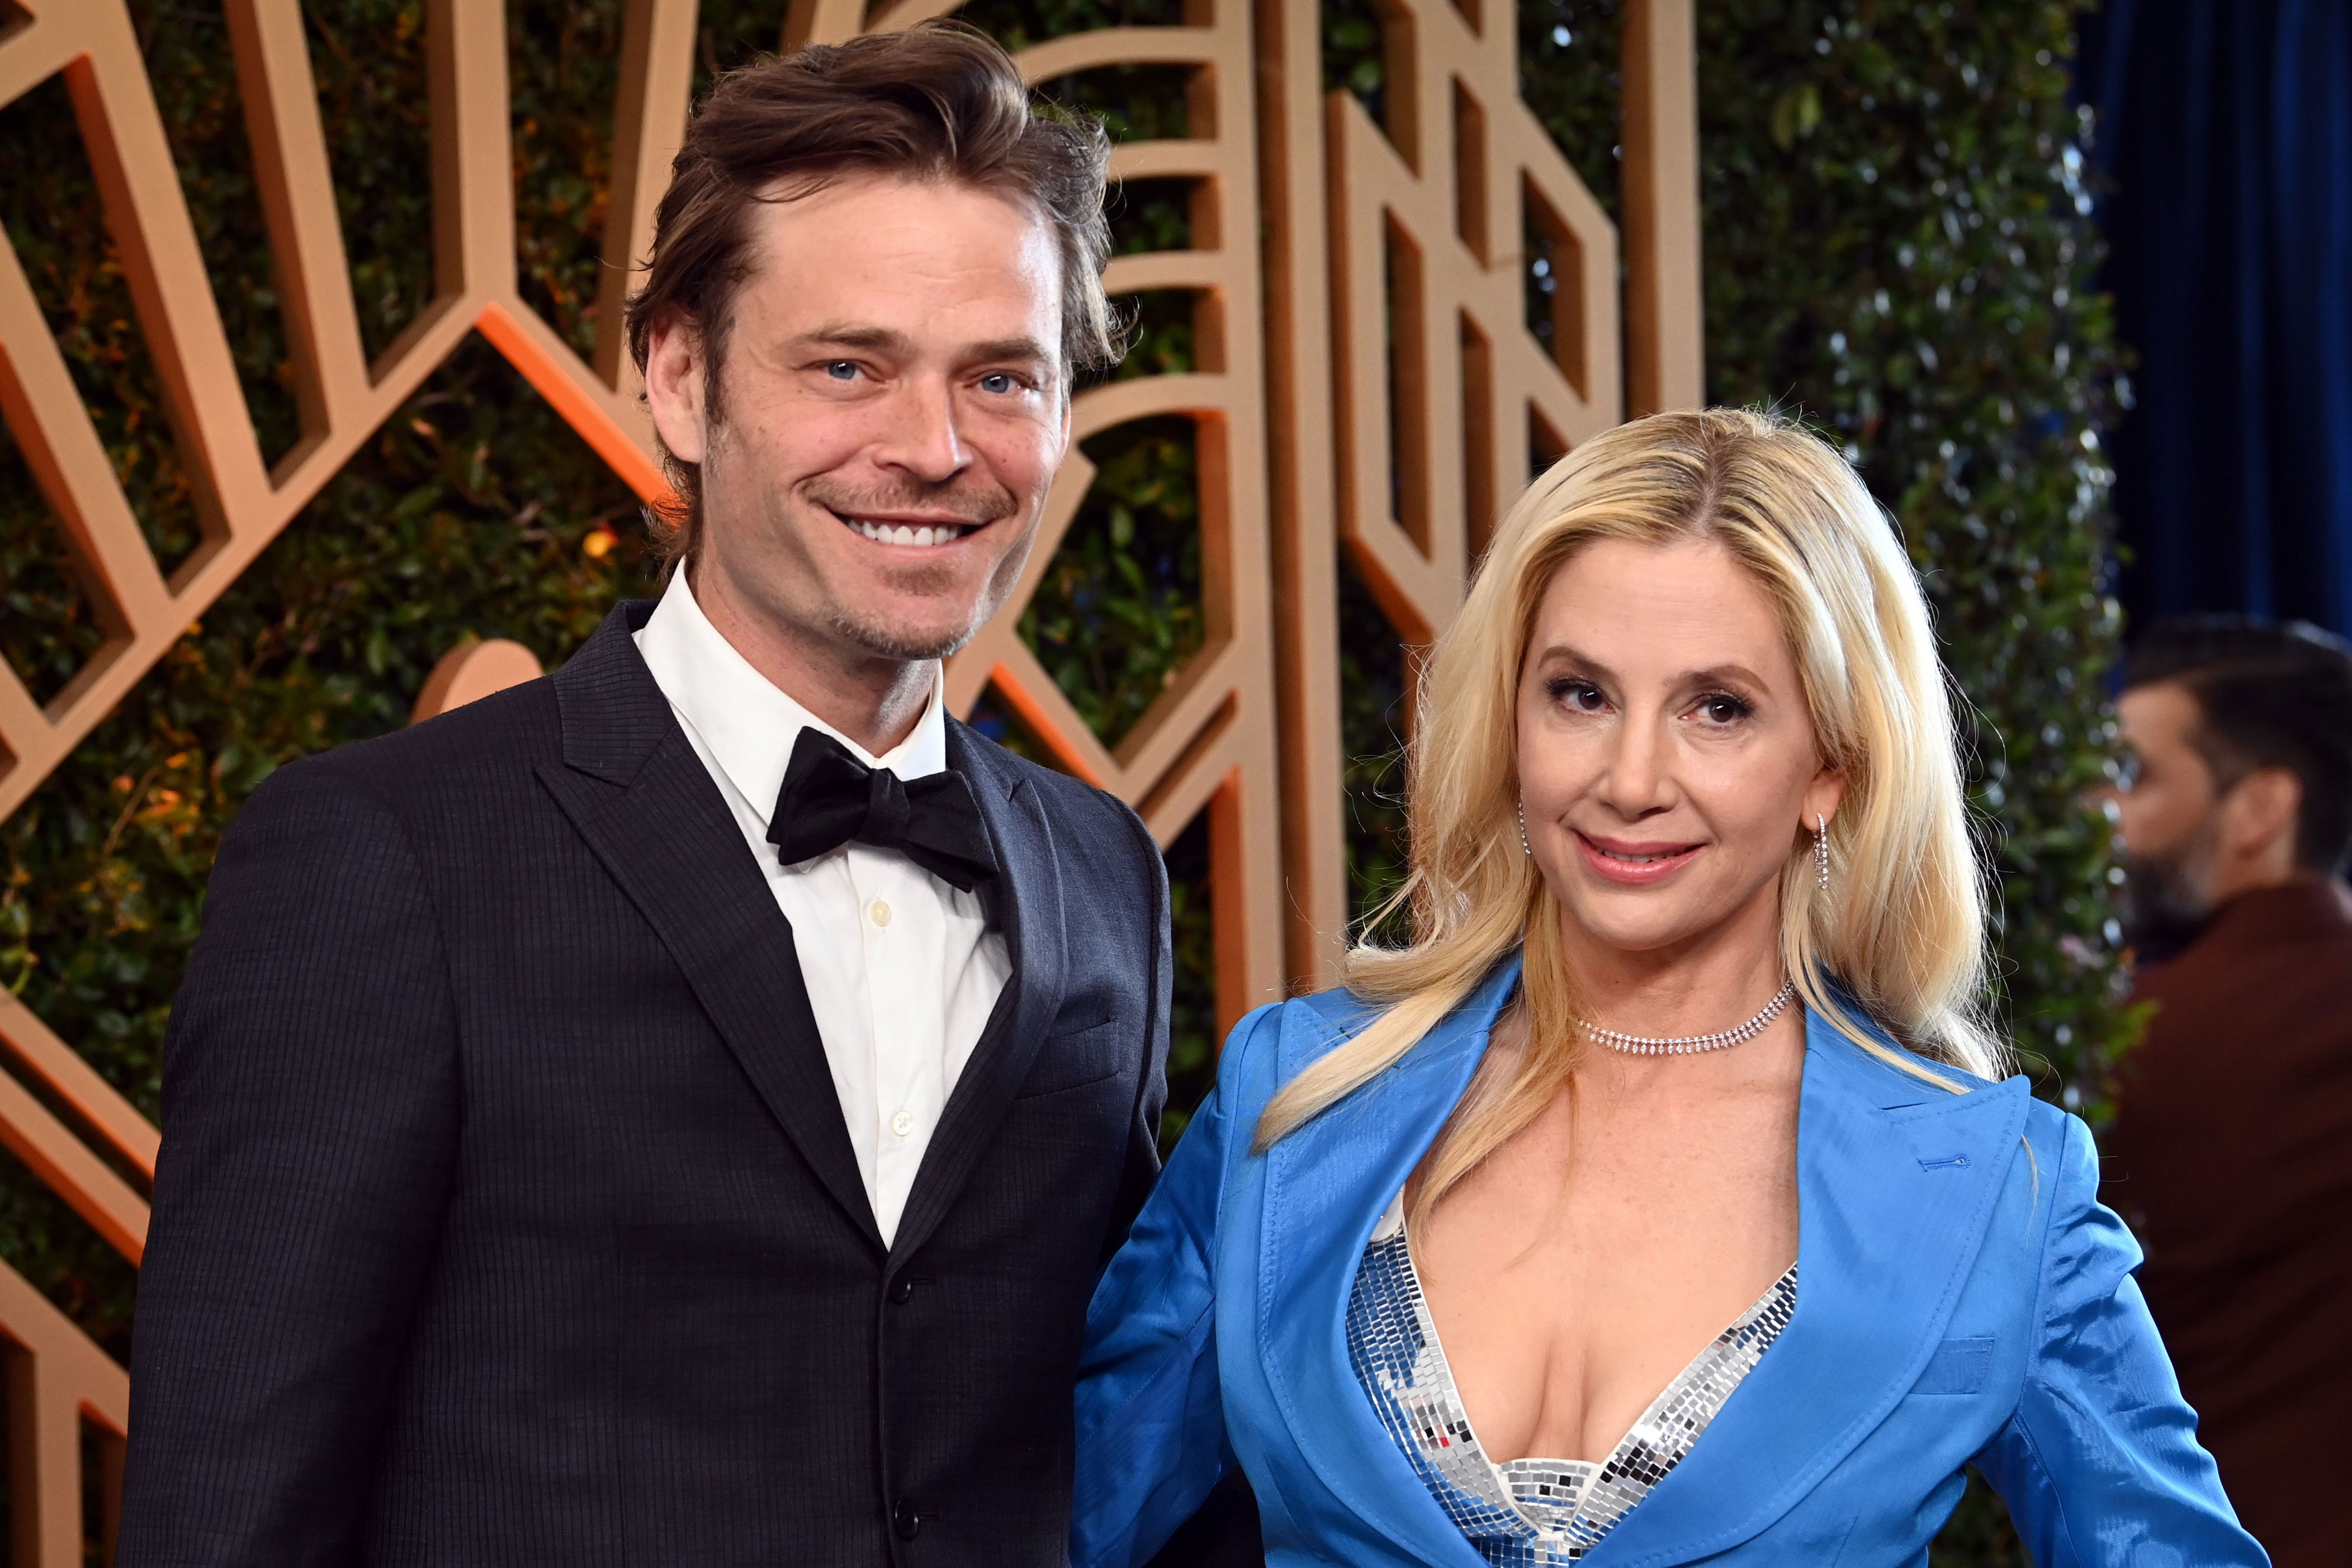 <p>There are 14 years between Oscar winner Mira Sorvino and actor husband Christopher Backus. When the couple (seen here at the <a href="https://www.wonderwall.com/awards-events/red-carpet/2022-sag-awards-celebs-on-the-red-carpet-at-the-screen-actors-guild-awards-this-year-564788.gallery">2022 SAG Awards</a>) -- who are now parents of four -- married in 2004, she was 36 and he was 22. </p>